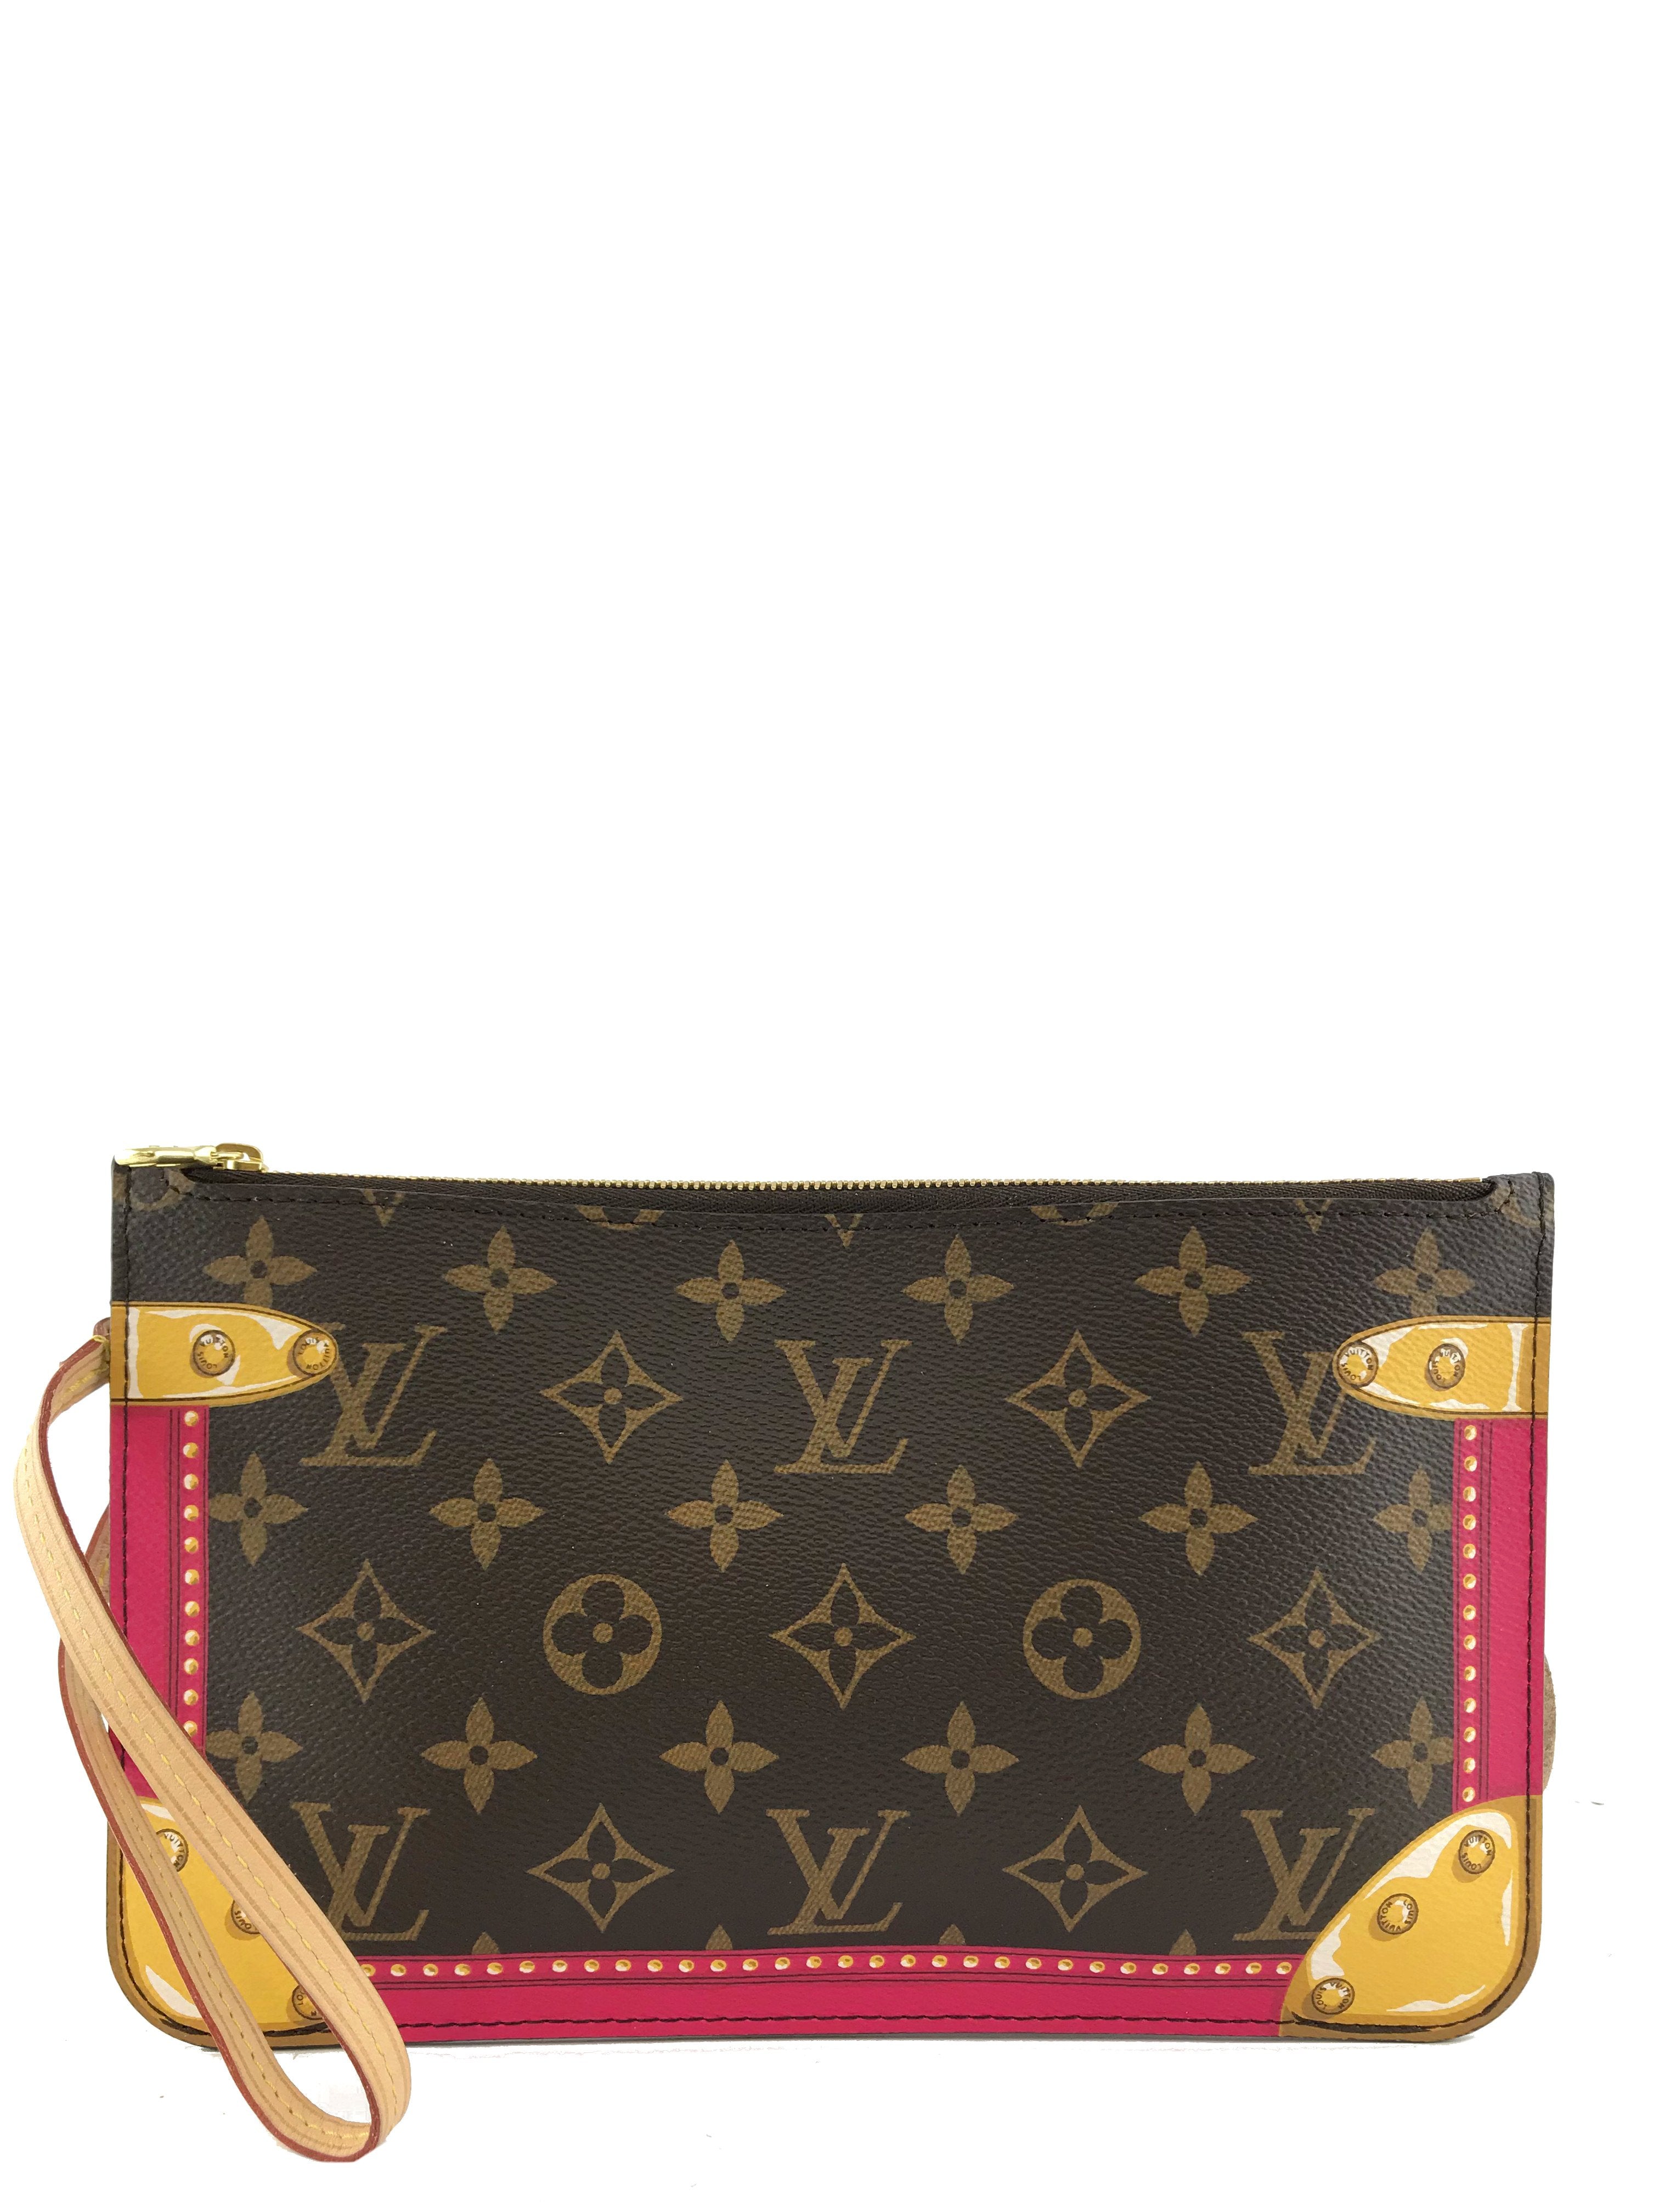 Louis Vuitton Brown Leather Neverfull Trunks Bag